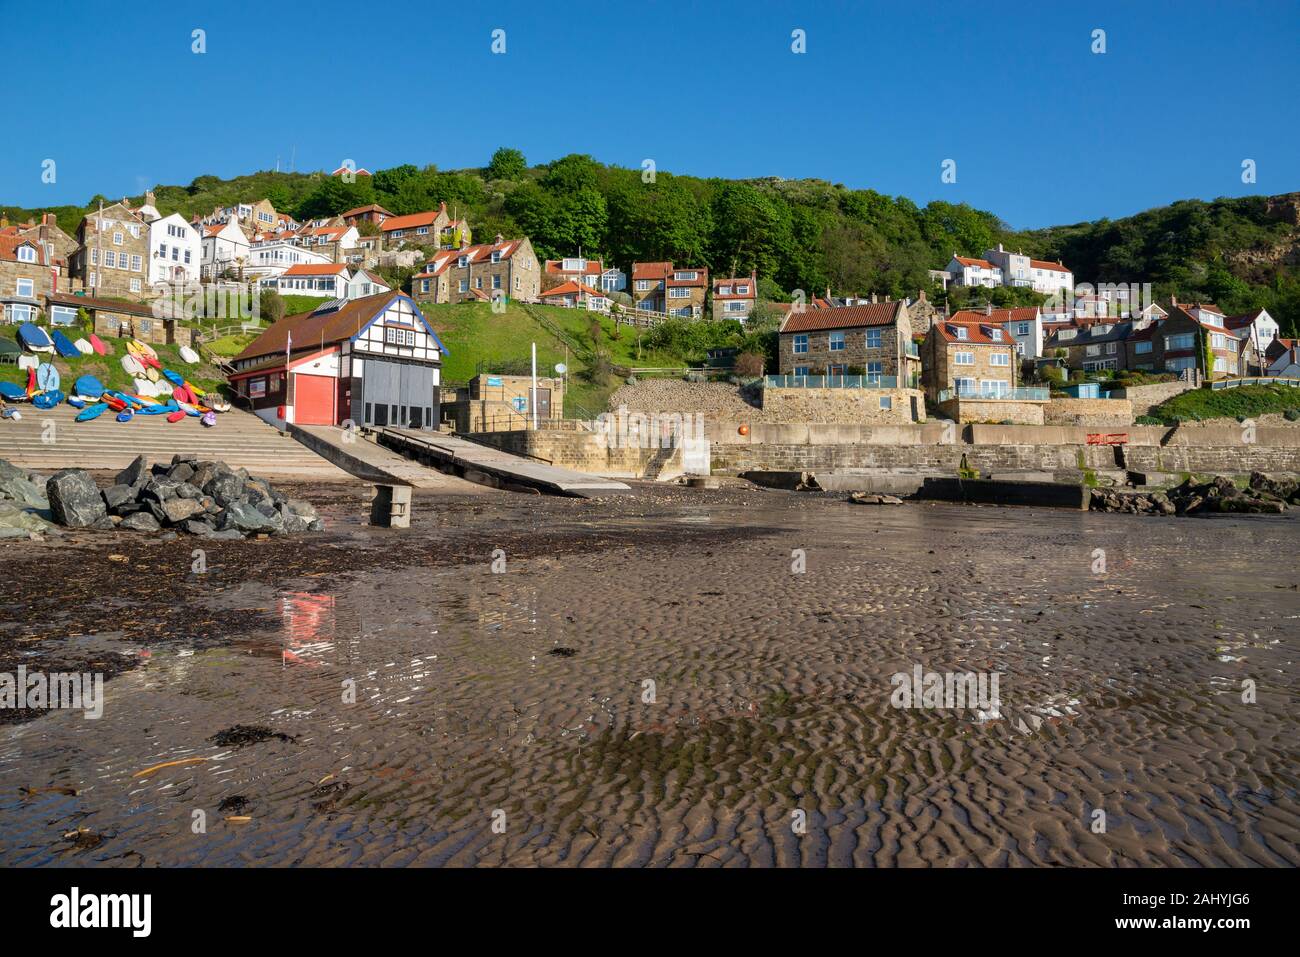 A sunny spring day at Runswick Bay on the coast of East Yorkshire, England. Stock Photo